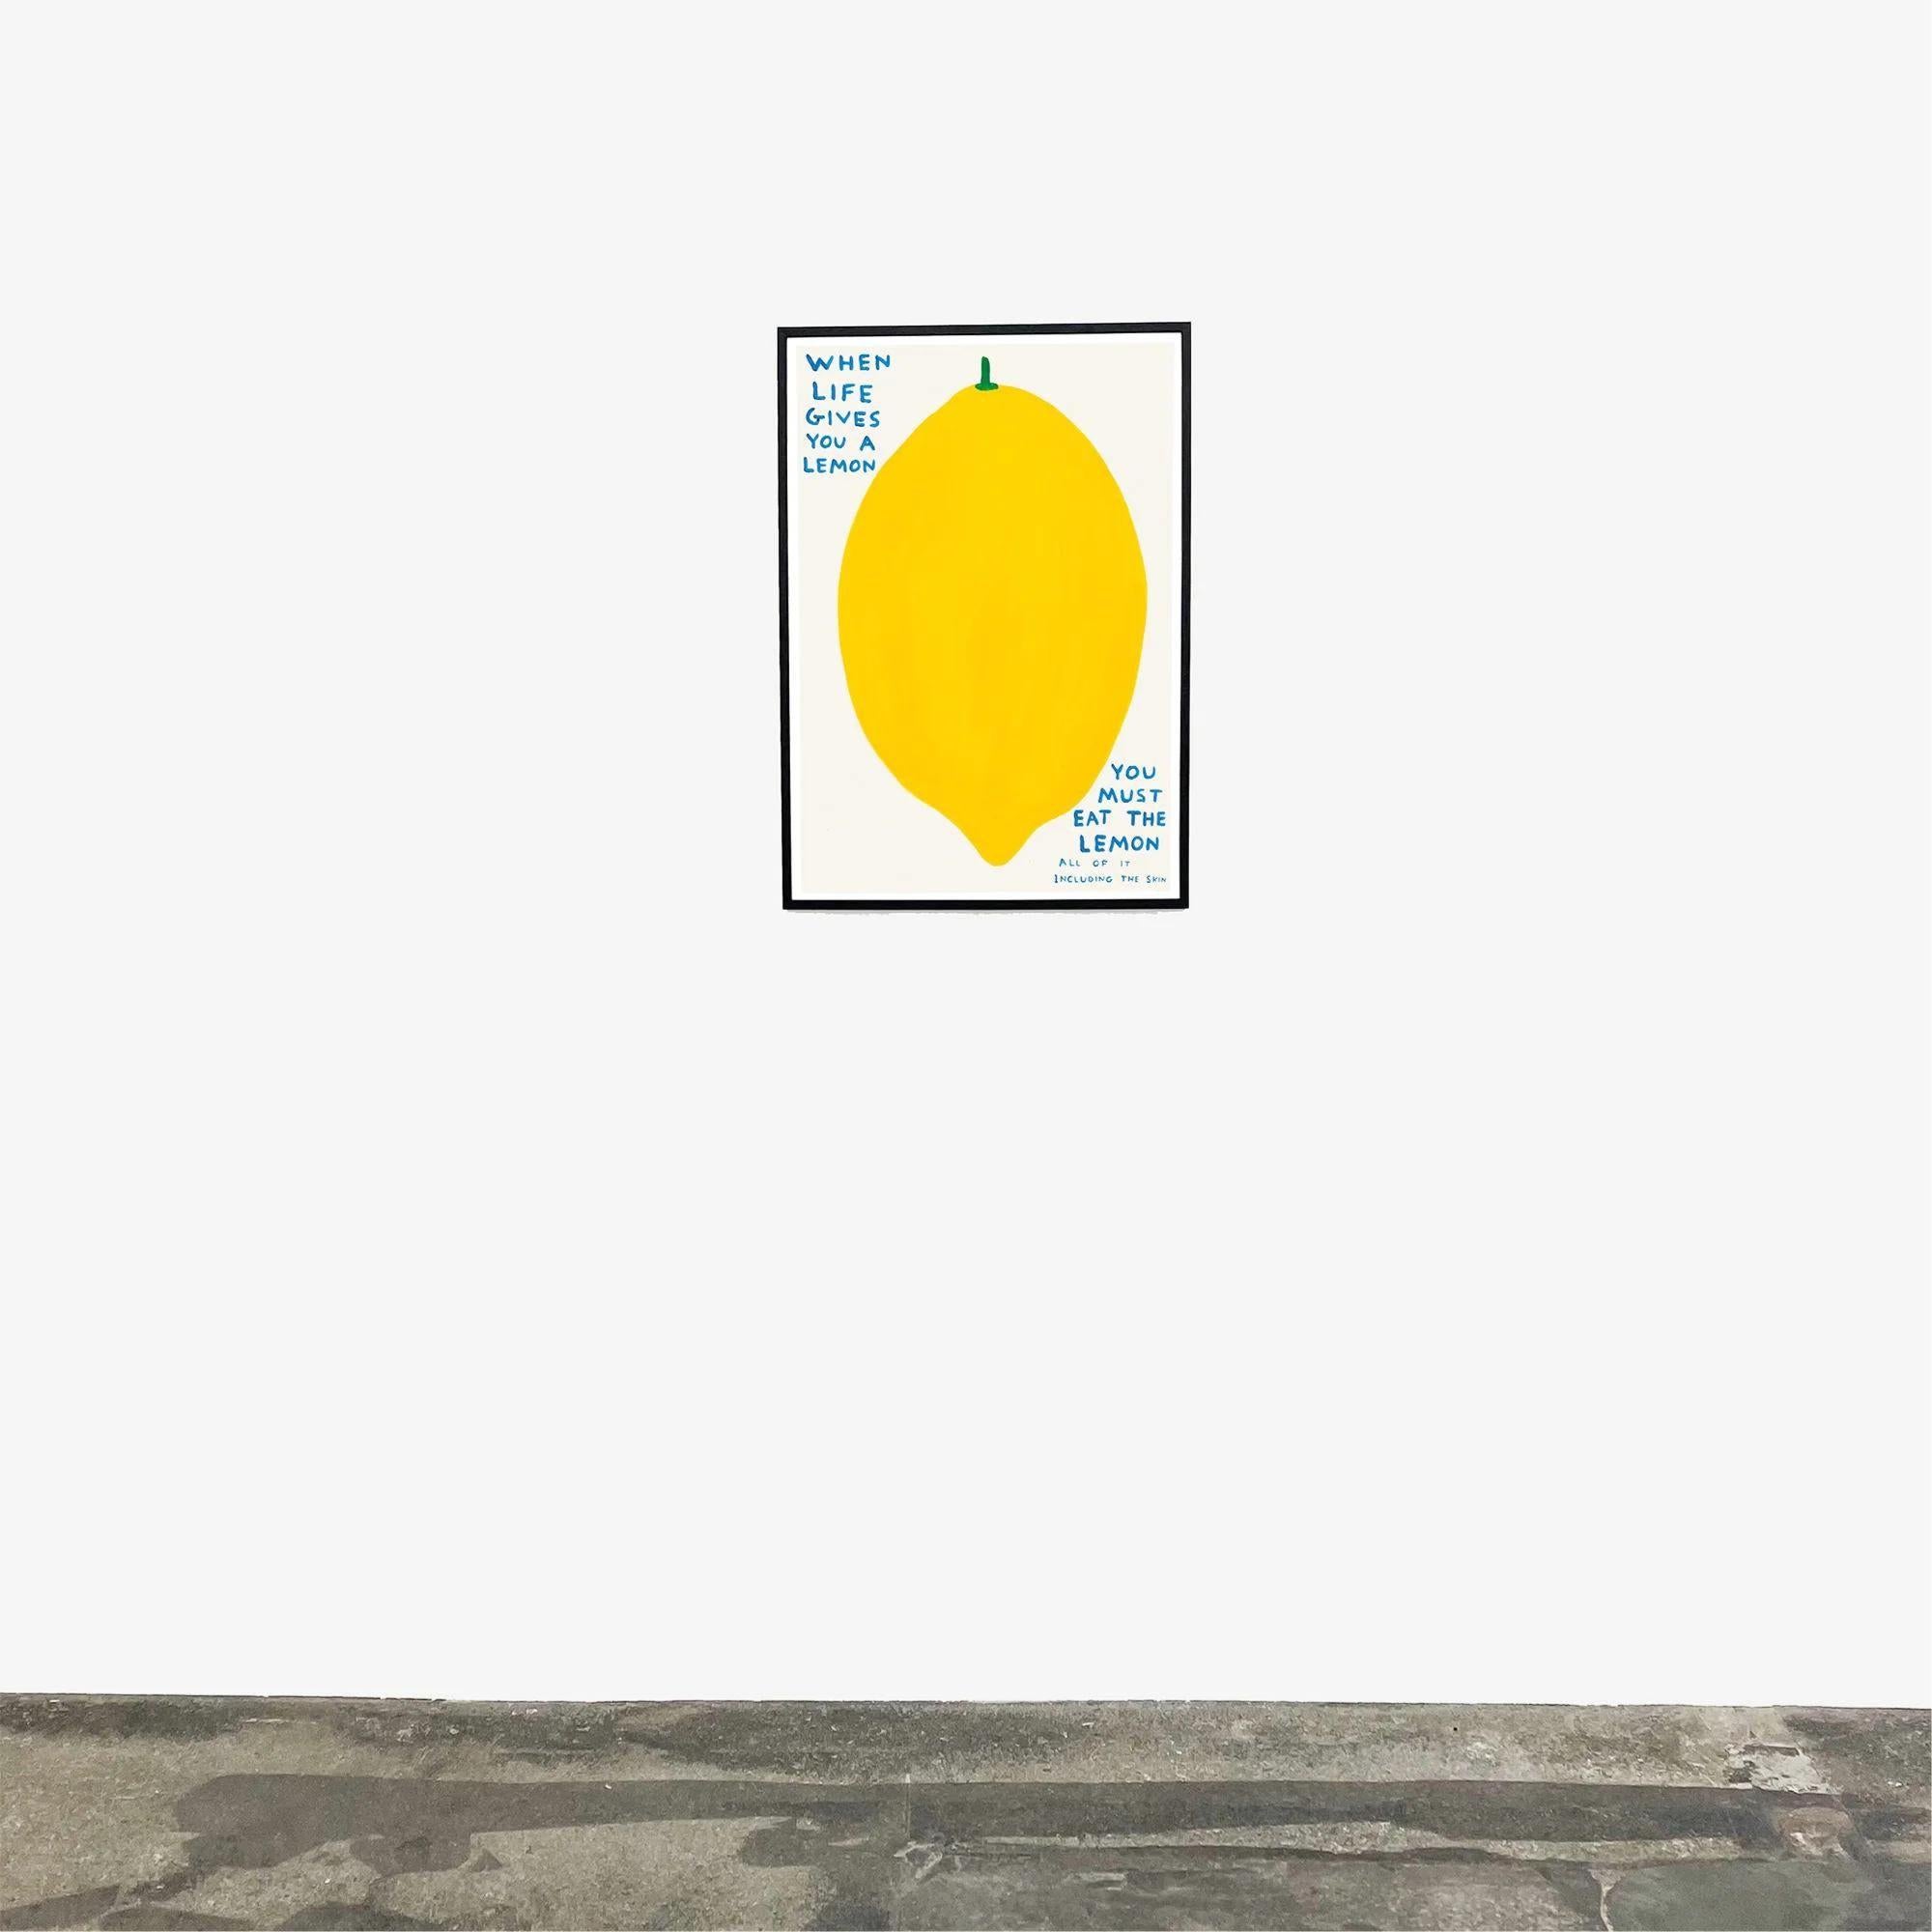 When Life Gives You A Lemon - Contemporary Print by David Shrigley